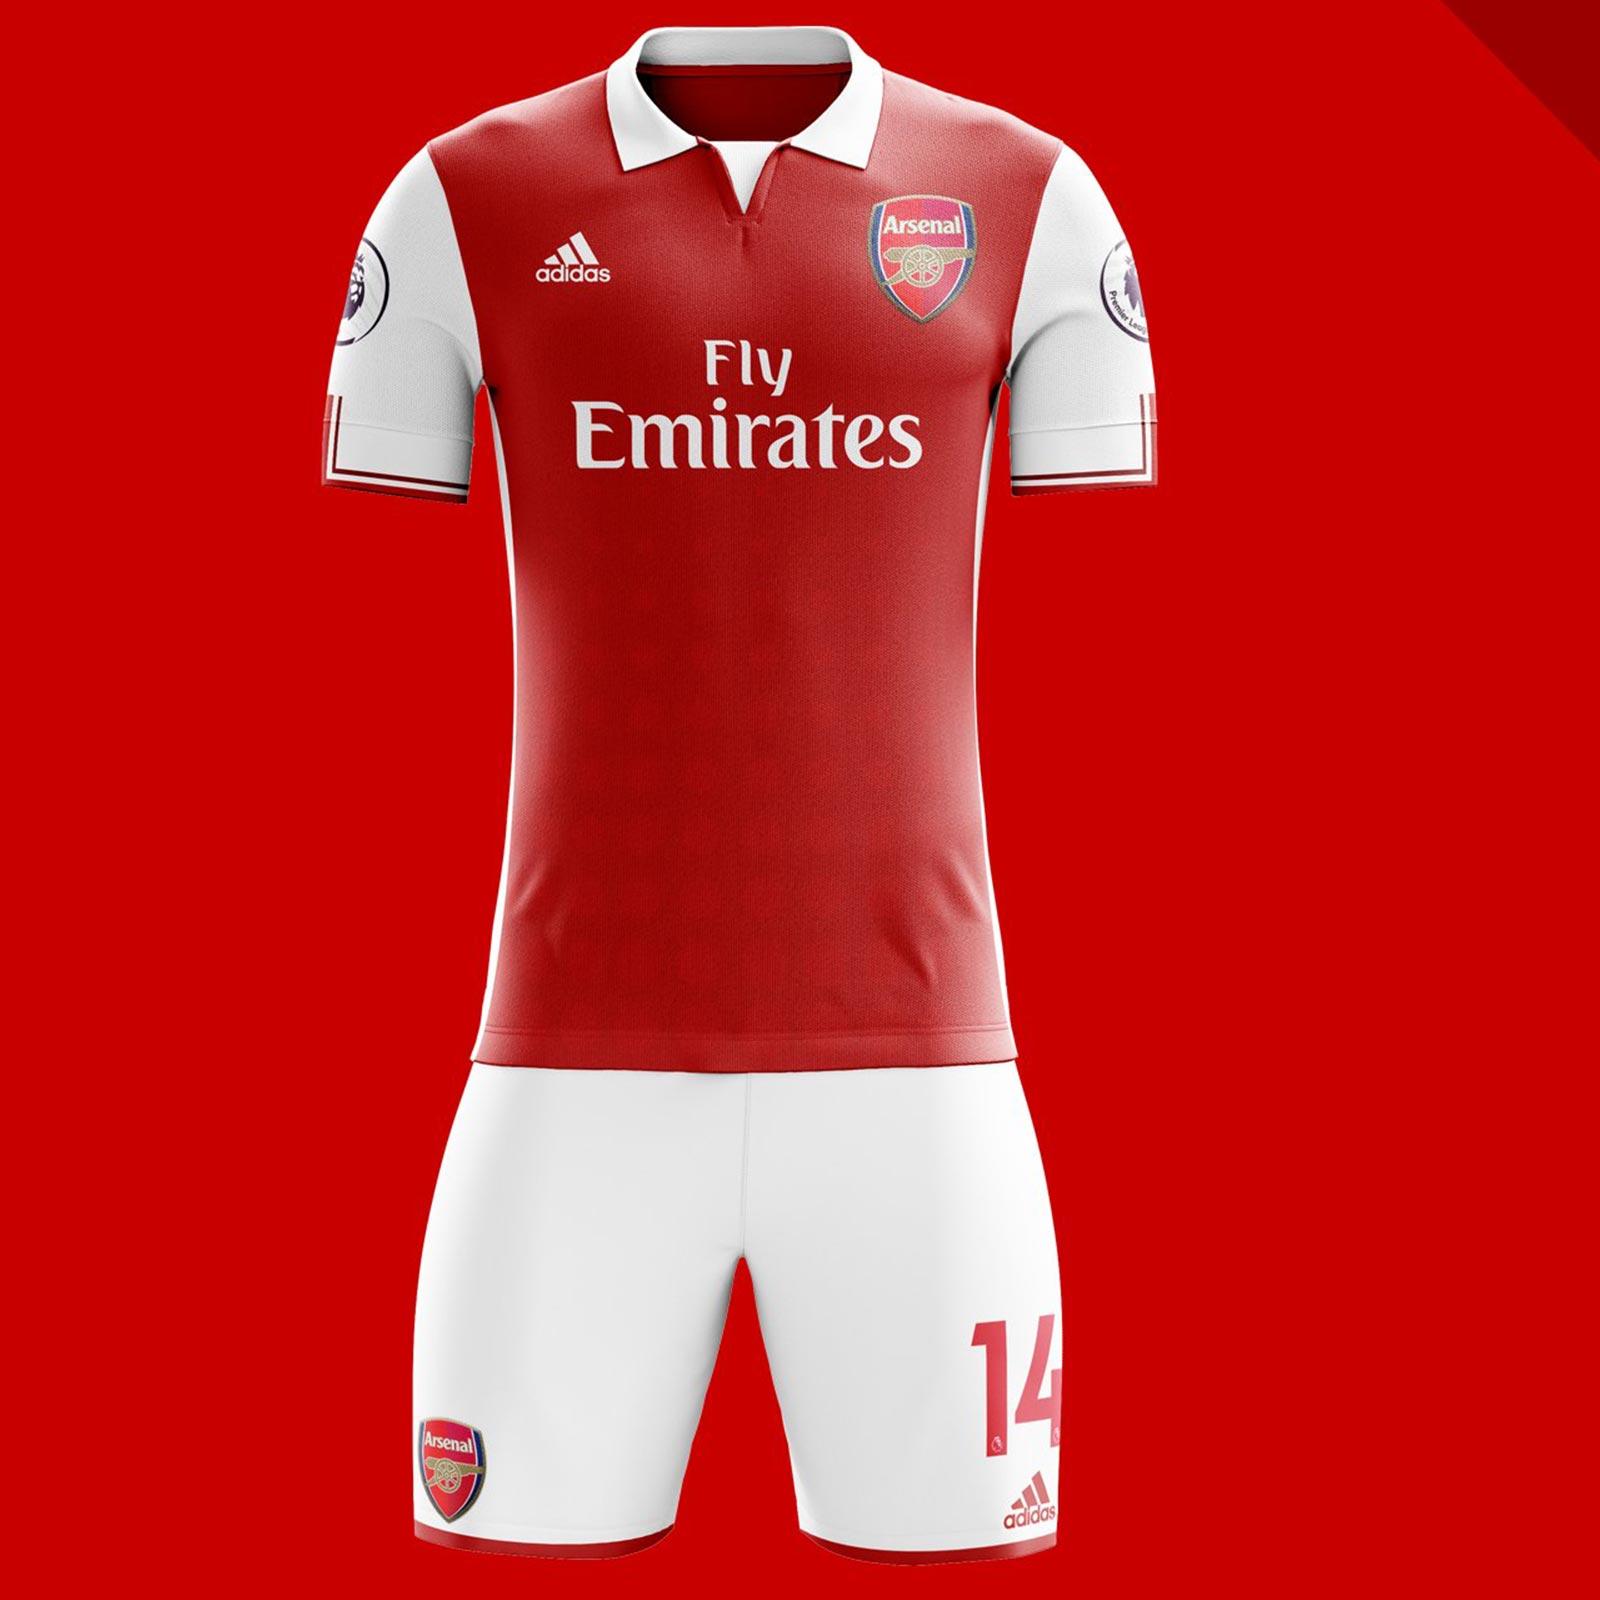 Image result for arsenal new jersey 2019/20